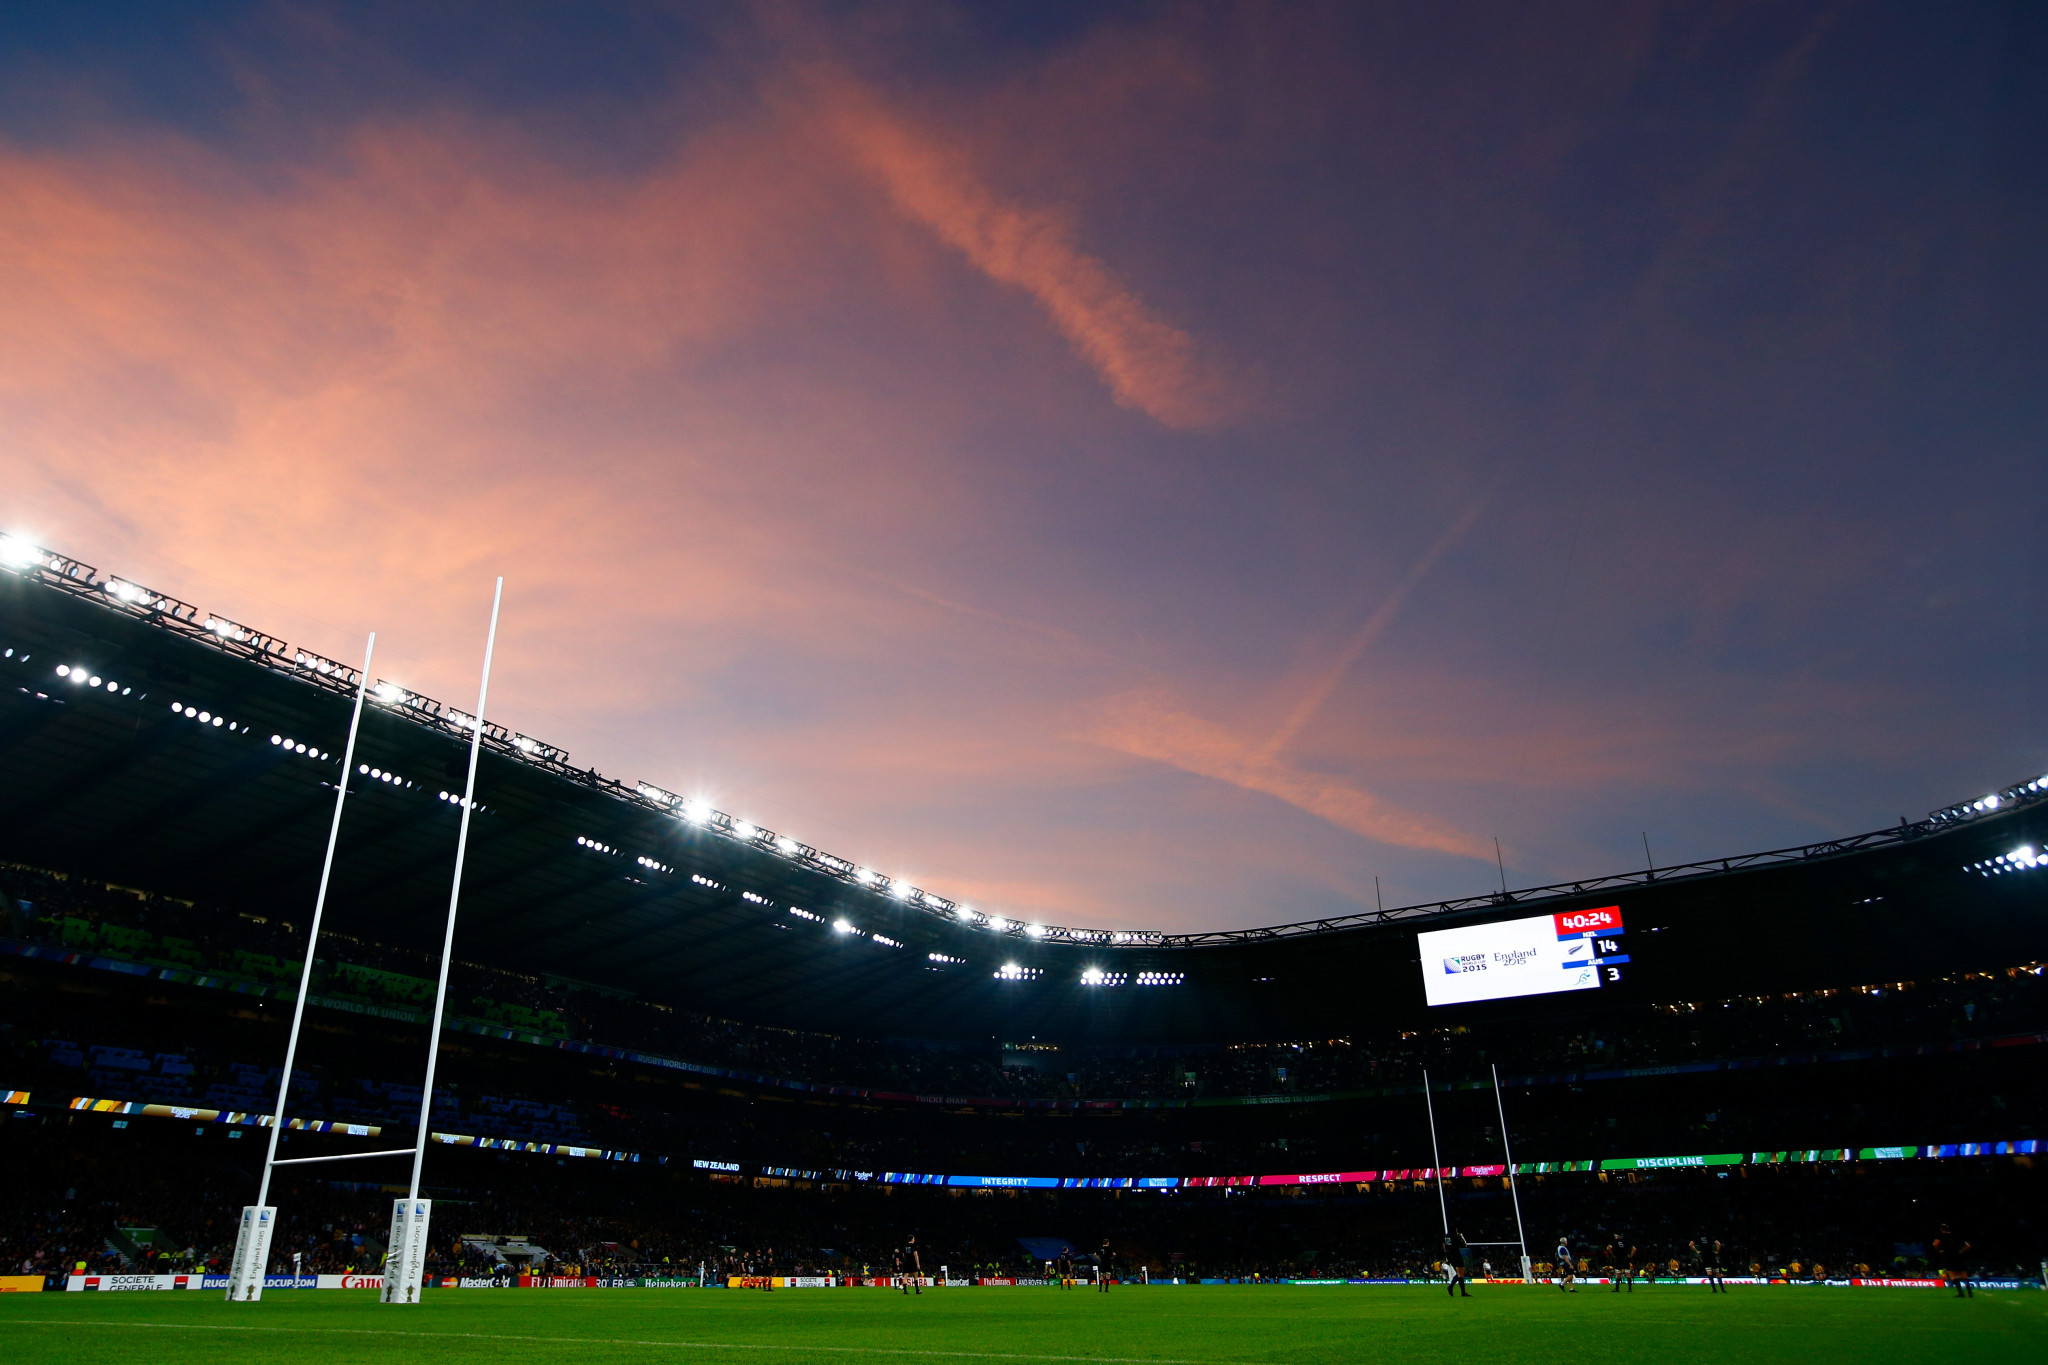 England hosted the men's Rugby World Cup in 2015, and RFU chairman Tom Ilube said England wants to host the 2031 edition ©Getty Images